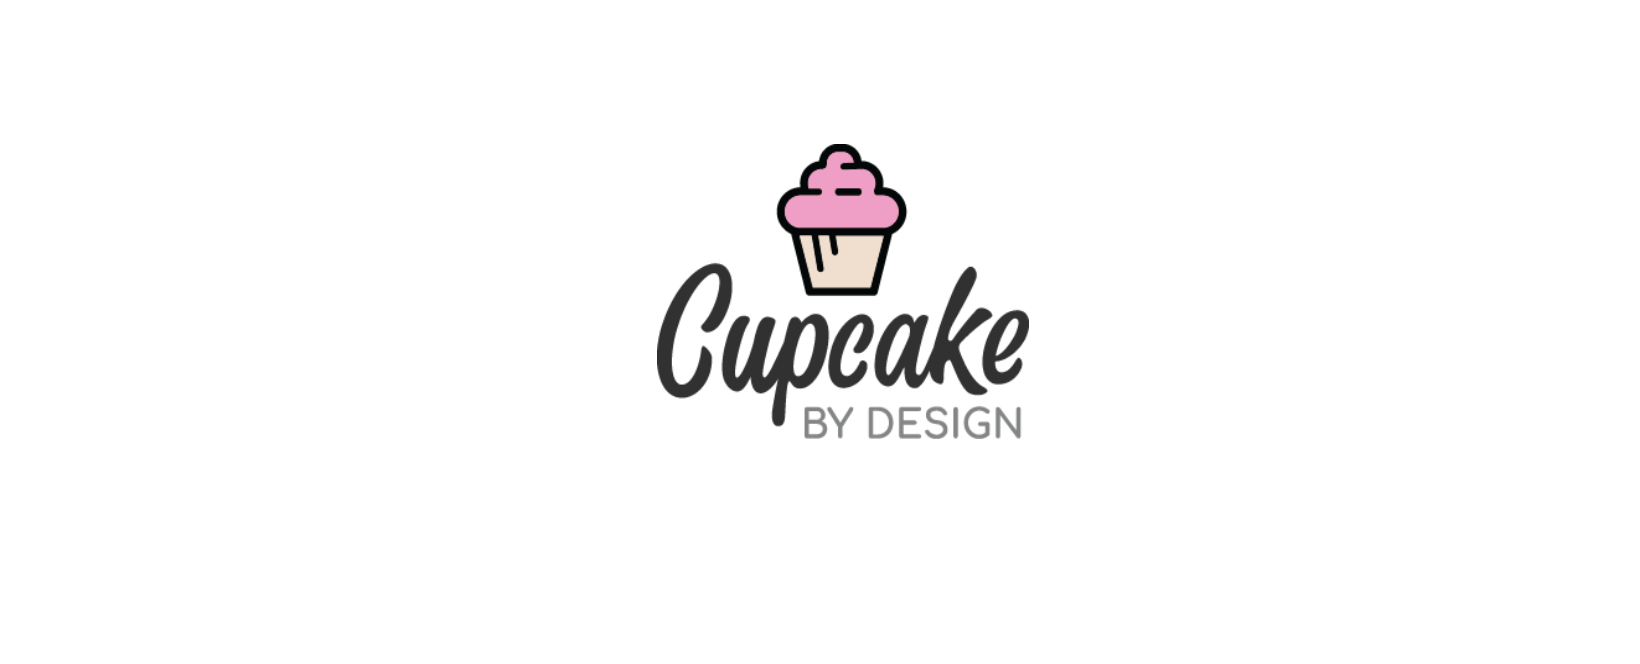 Cupcake by Design Discount Code 2022